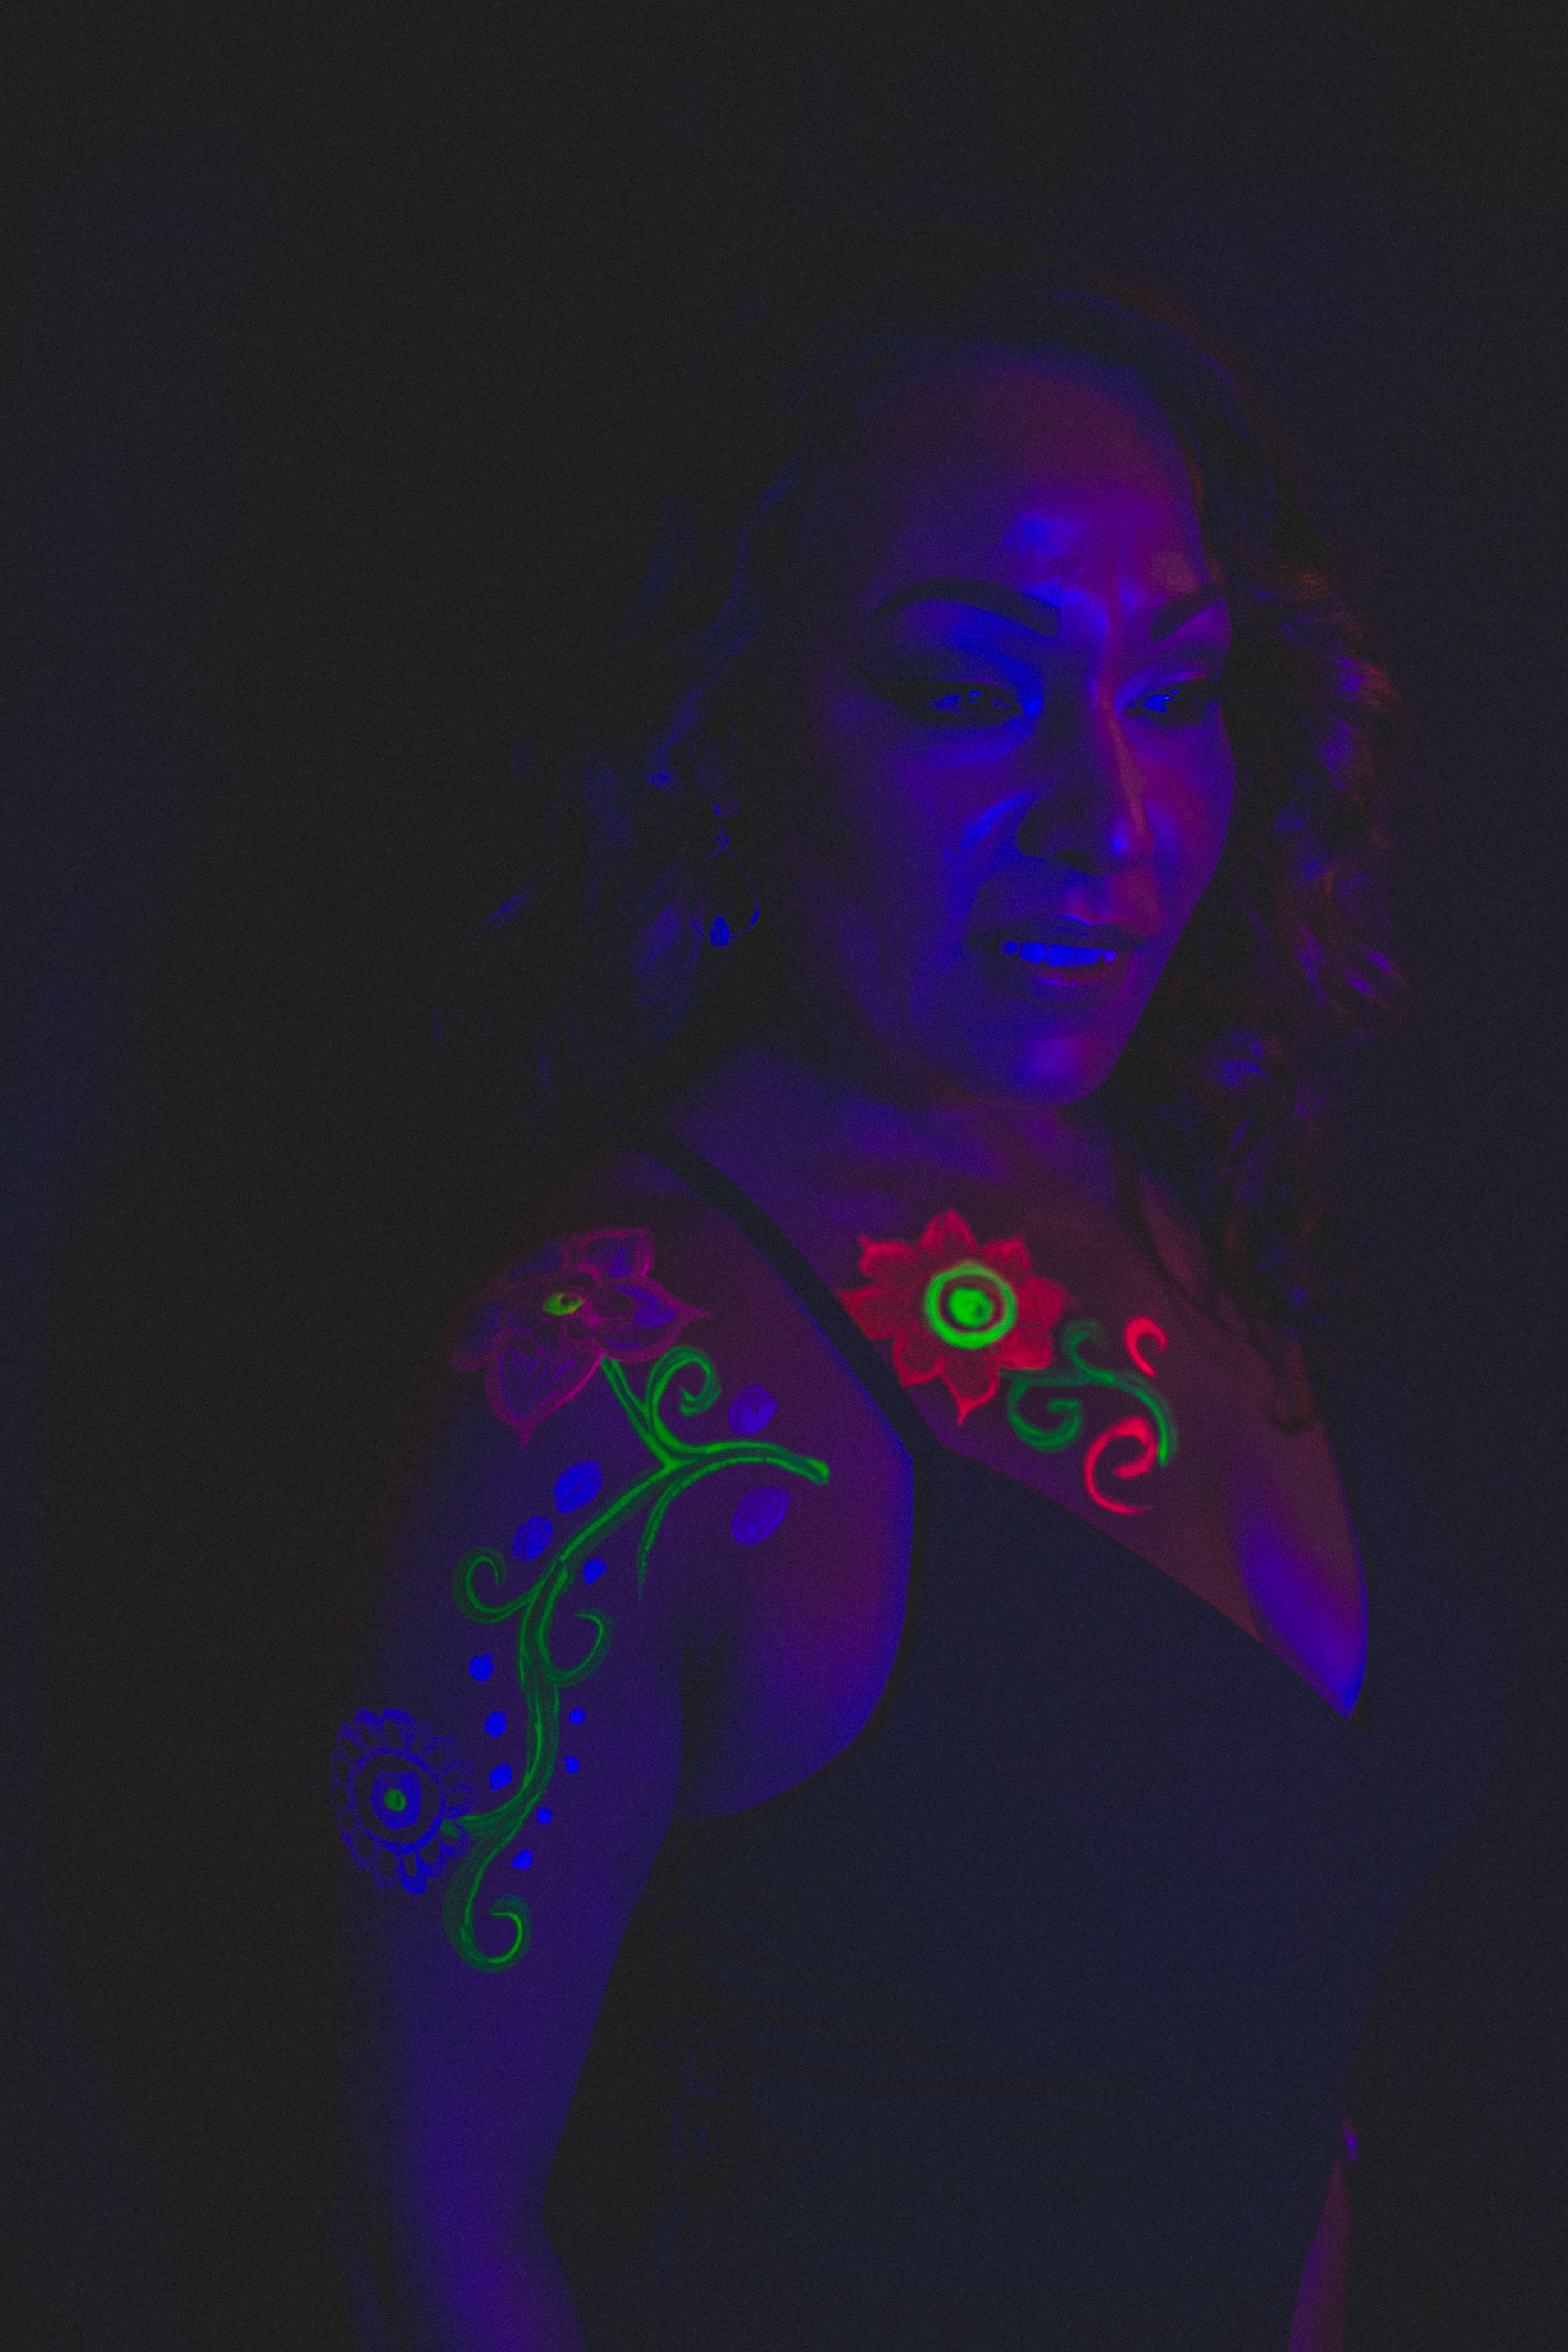 Woman poses with floral neon body paint on their face for alternative neon body painting creative photoshoot by phoenix body artist, La Luna Henna and photographer Jennifer Lind Schutsky.